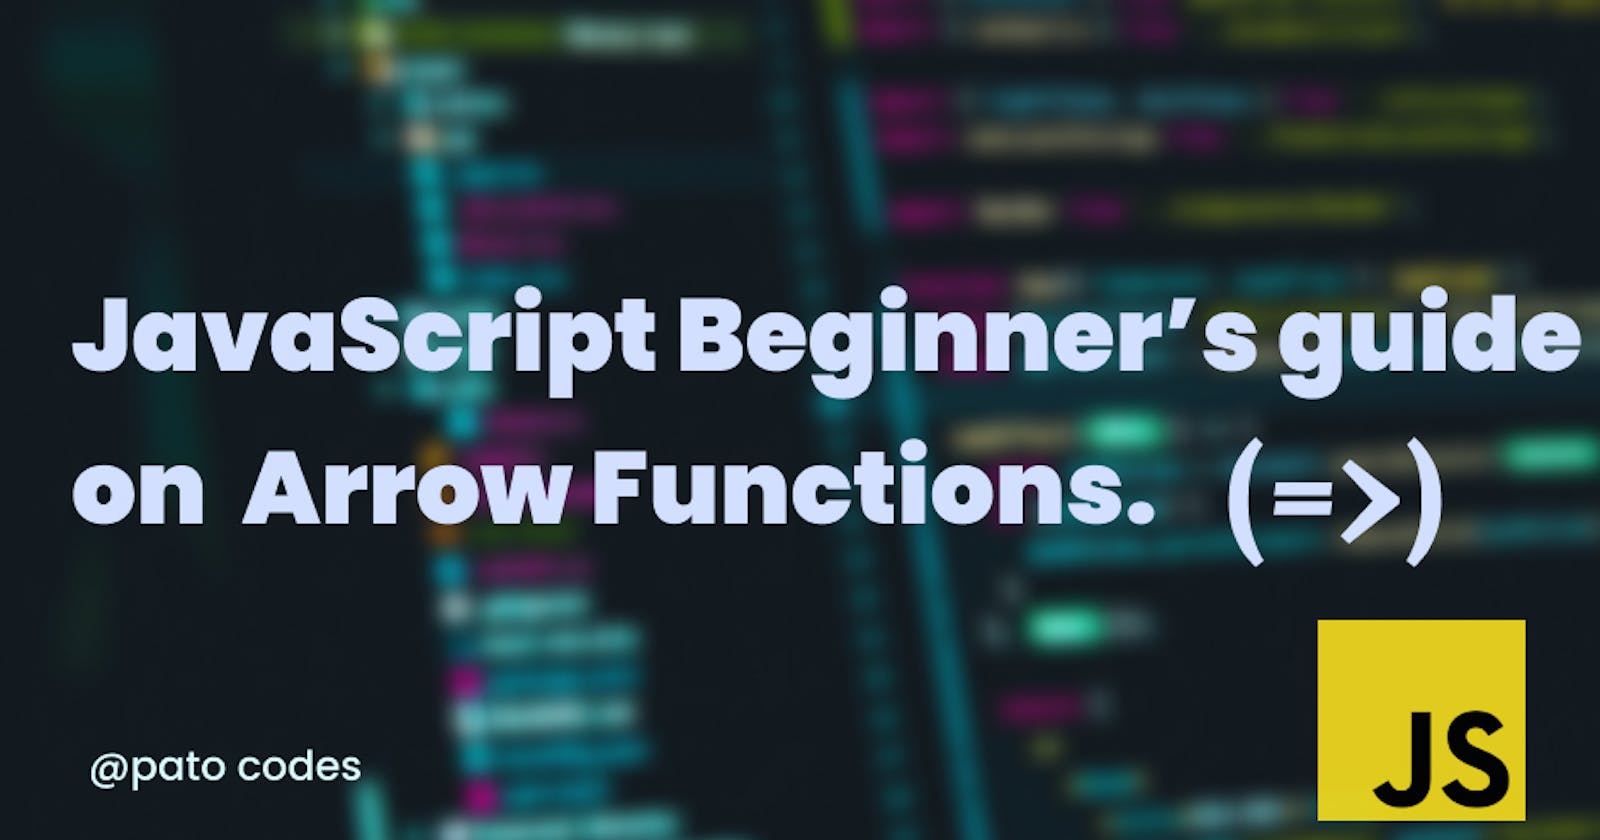 Getting to know Arrow functions in JavaScript.